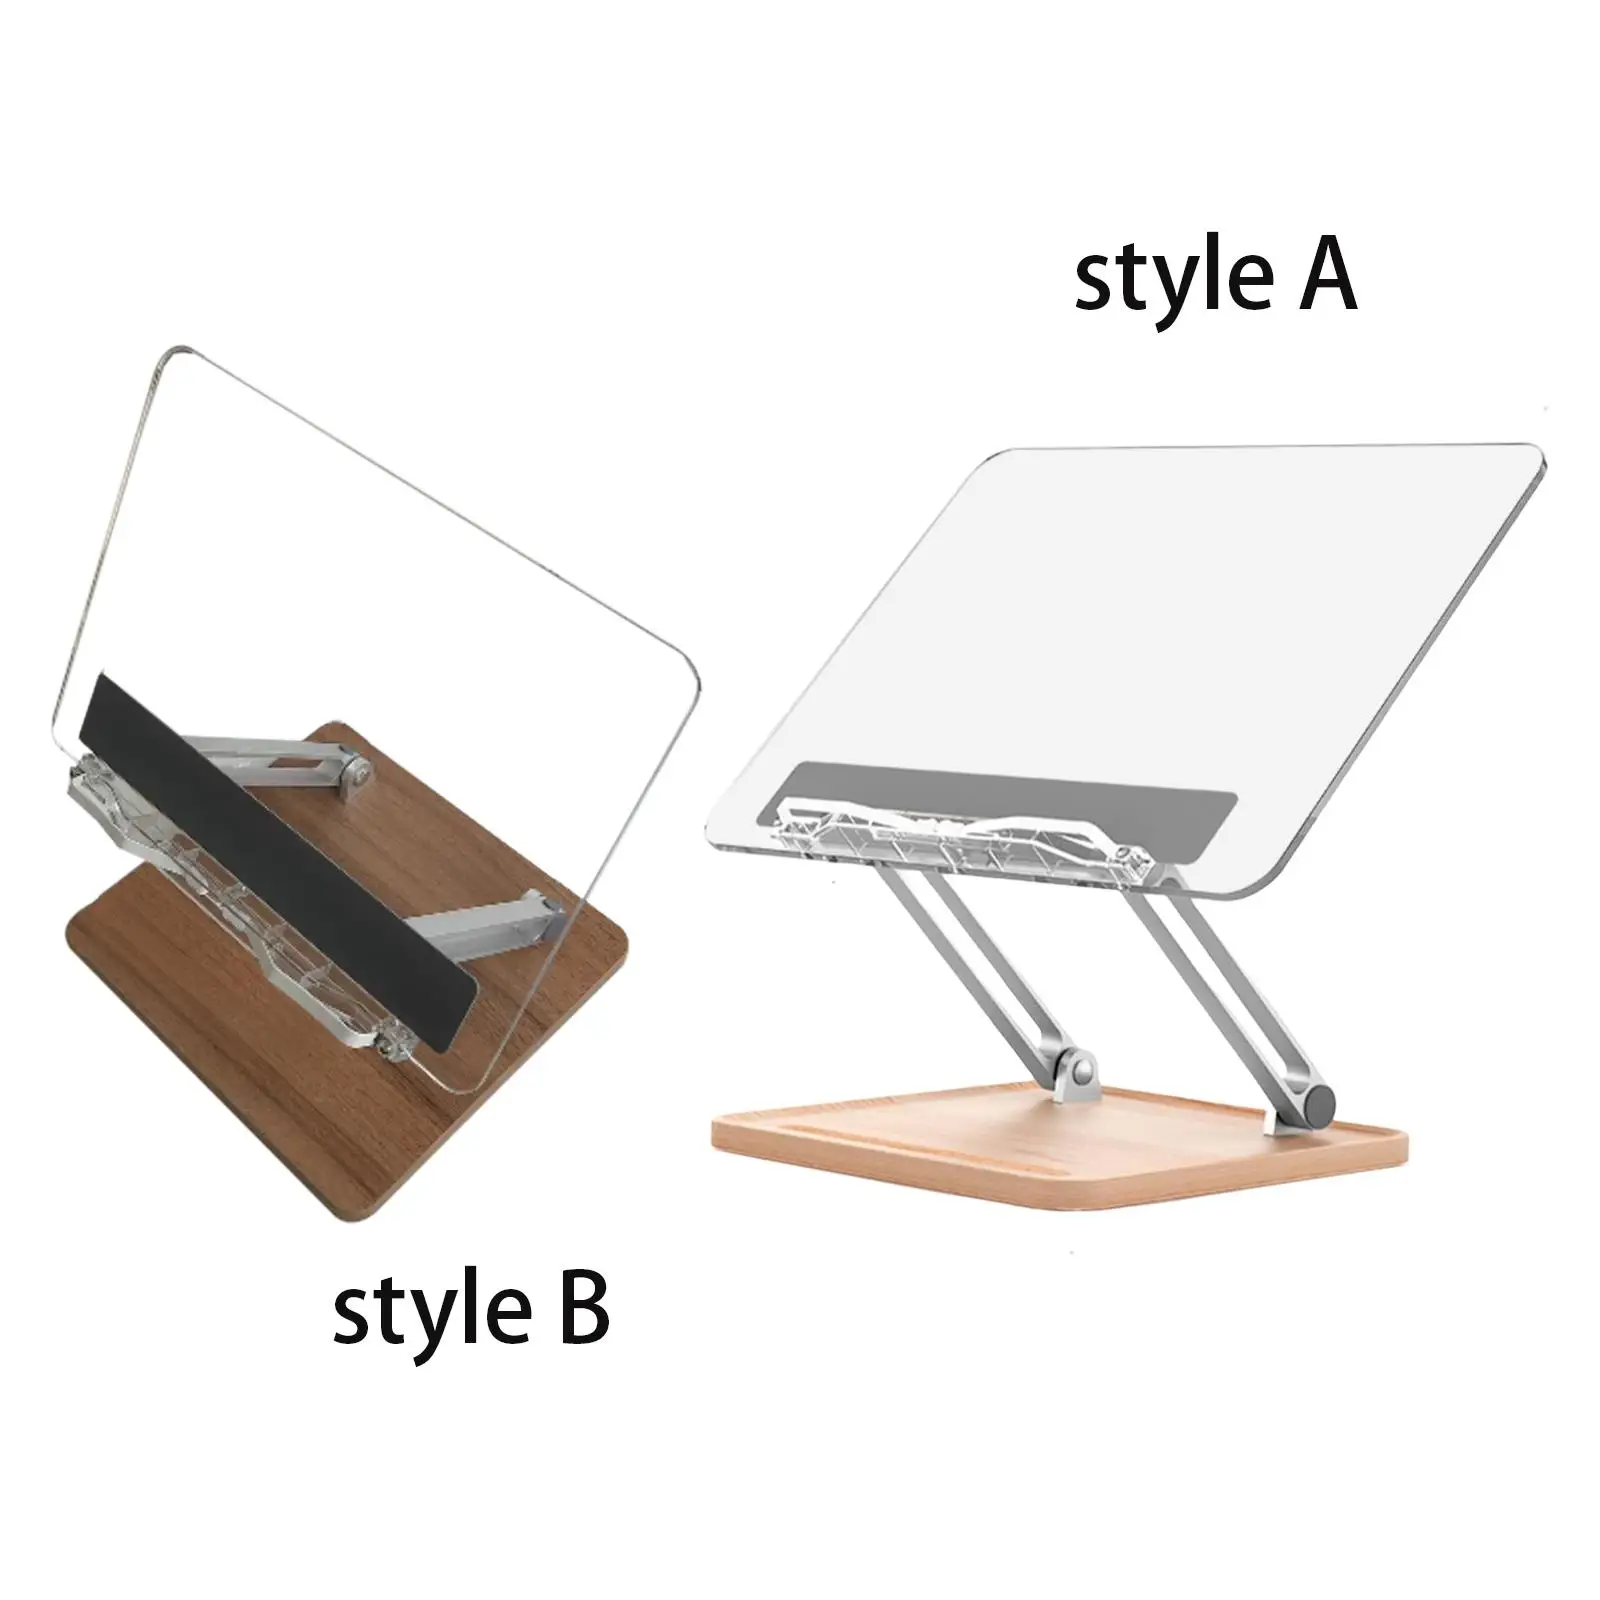 Book Stand Retractable Durable Easy Carry Save Space Hands Free Portable Laptop Holder for Kitchen Bedroom Desktop Desk Display